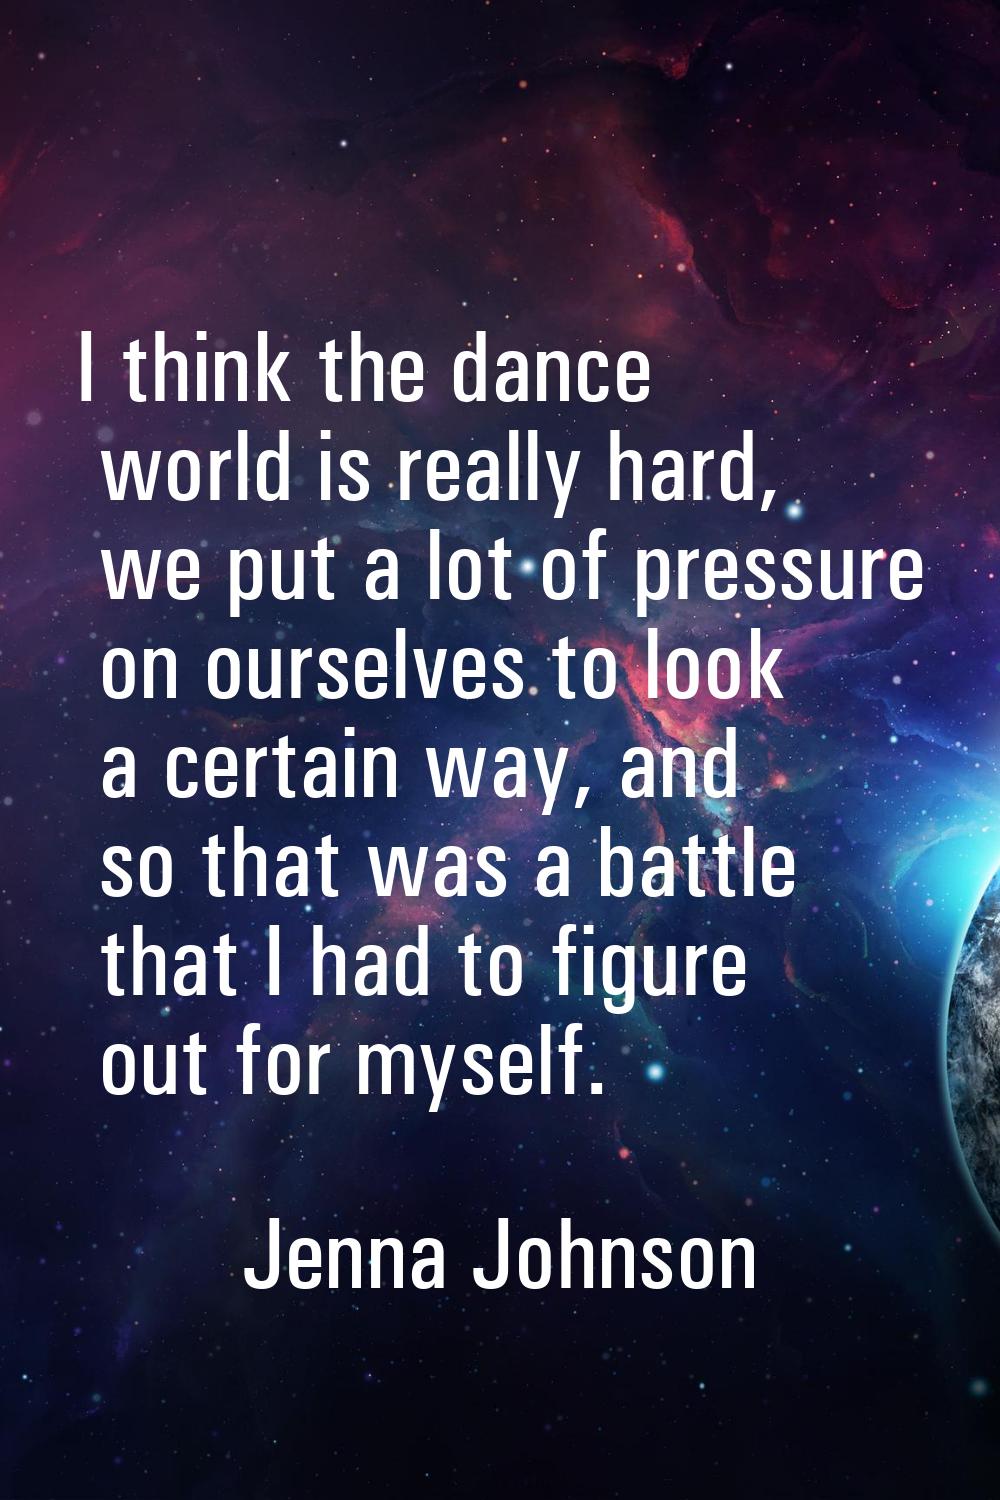 I think the dance world is really hard, we put a lot of pressure on ourselves to look a certain way